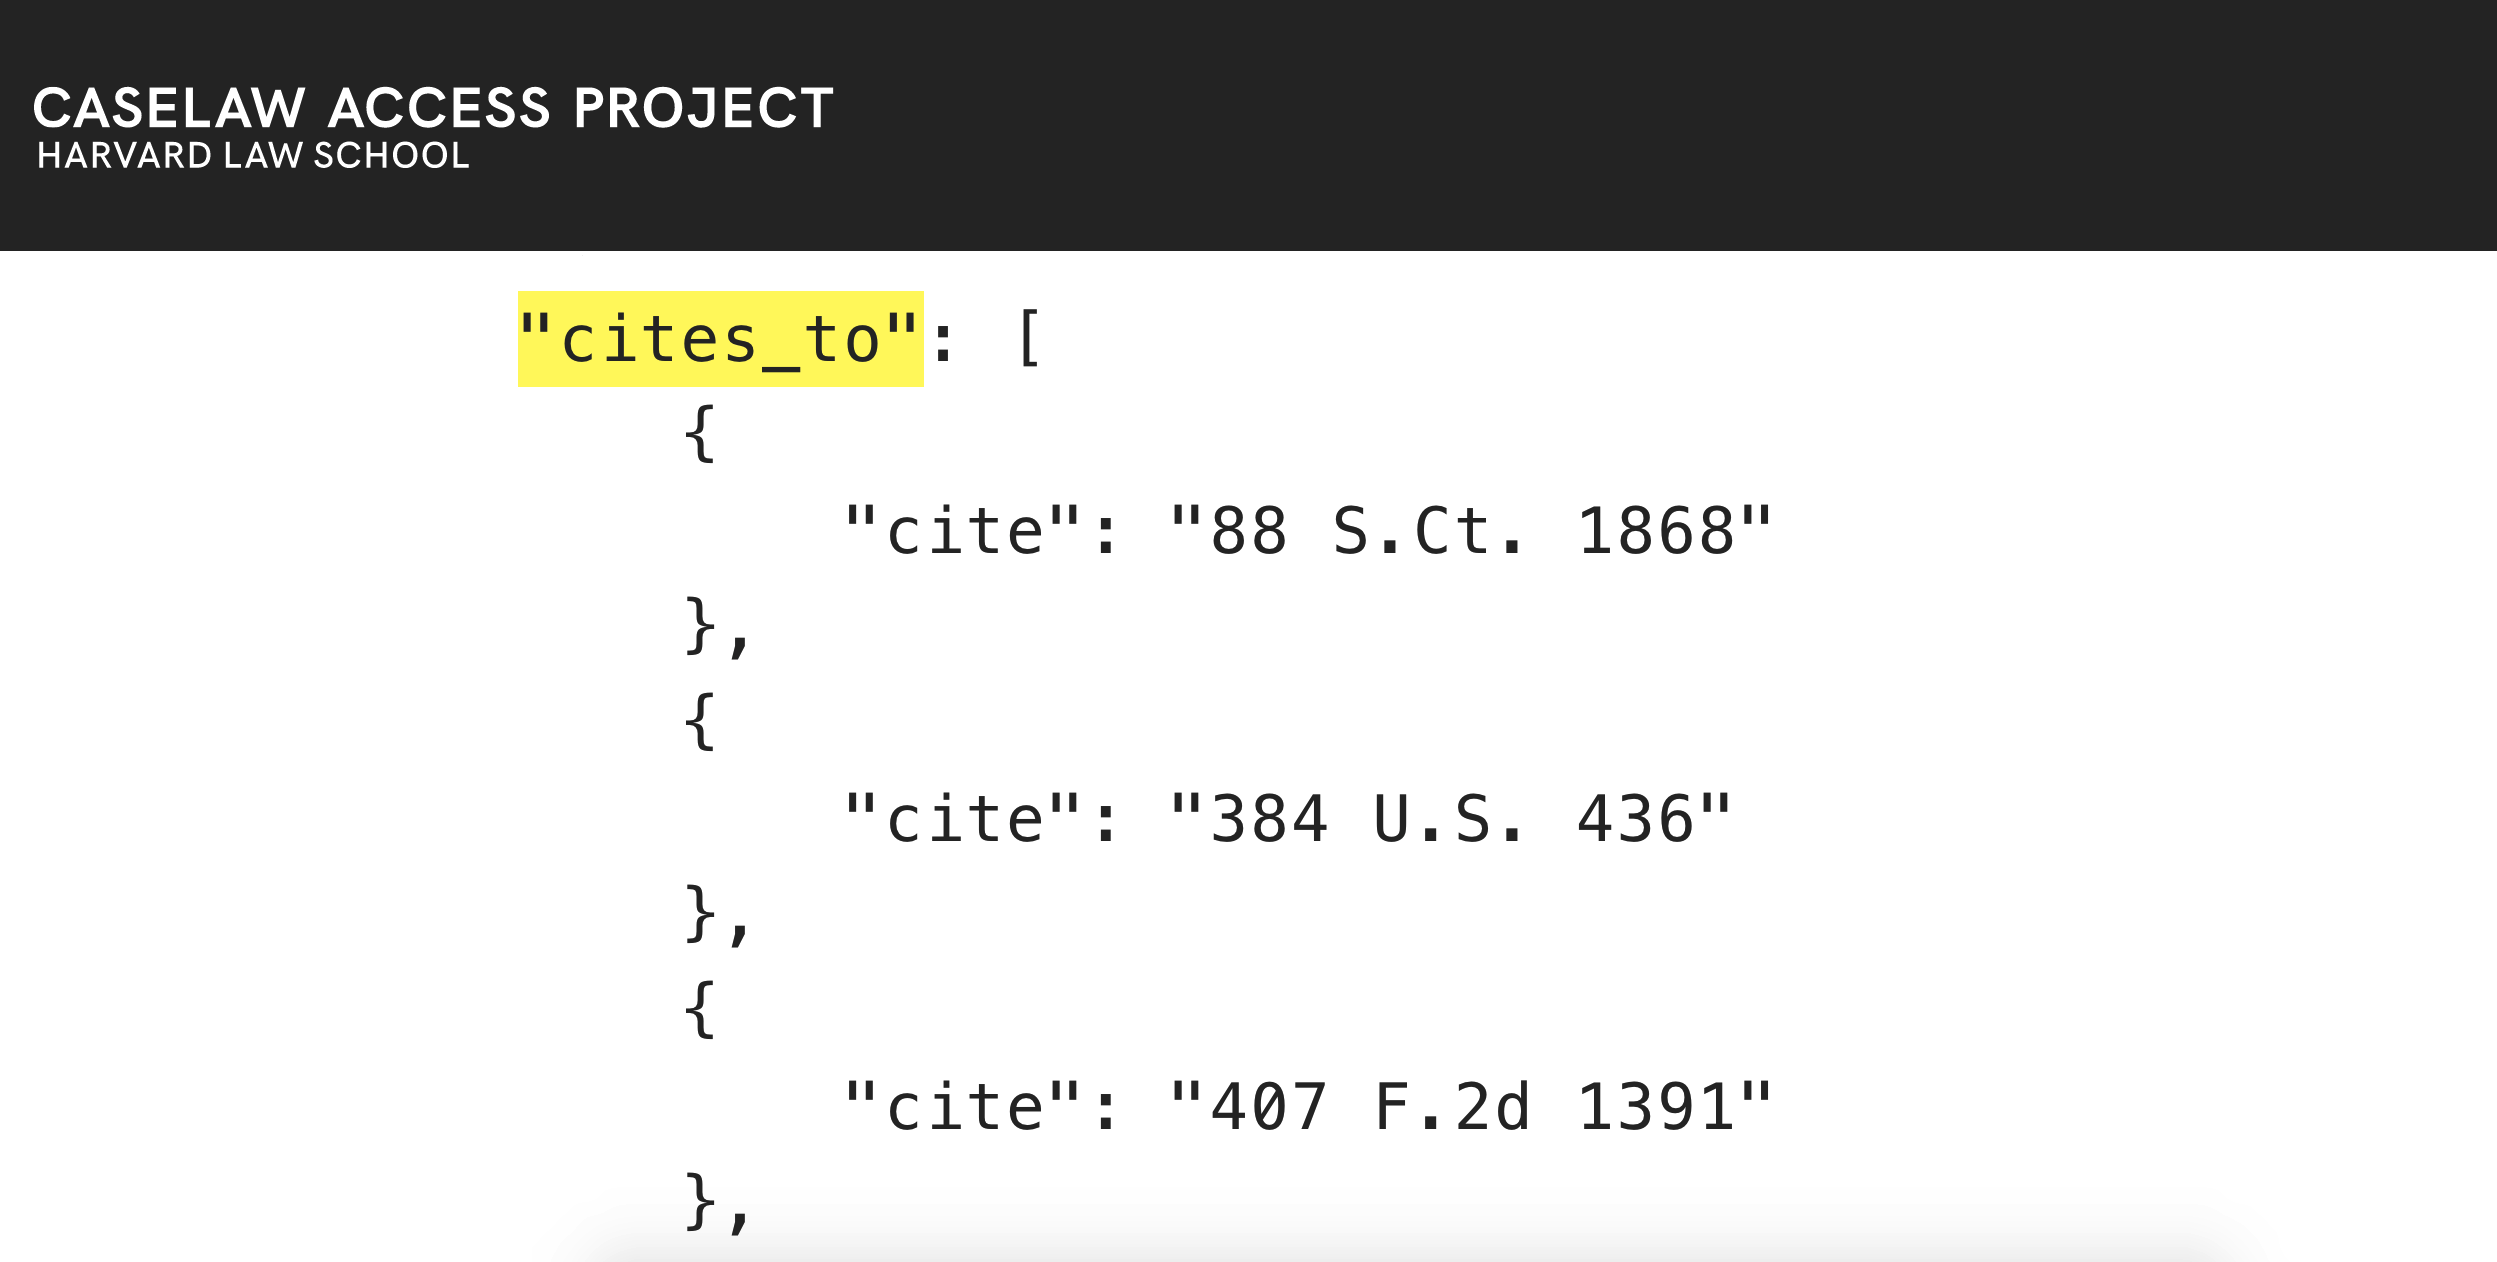 United States v. Kennedy, 573 F.2d 657 (1978) showing "cites_to" field in Caselaw Access Project API.